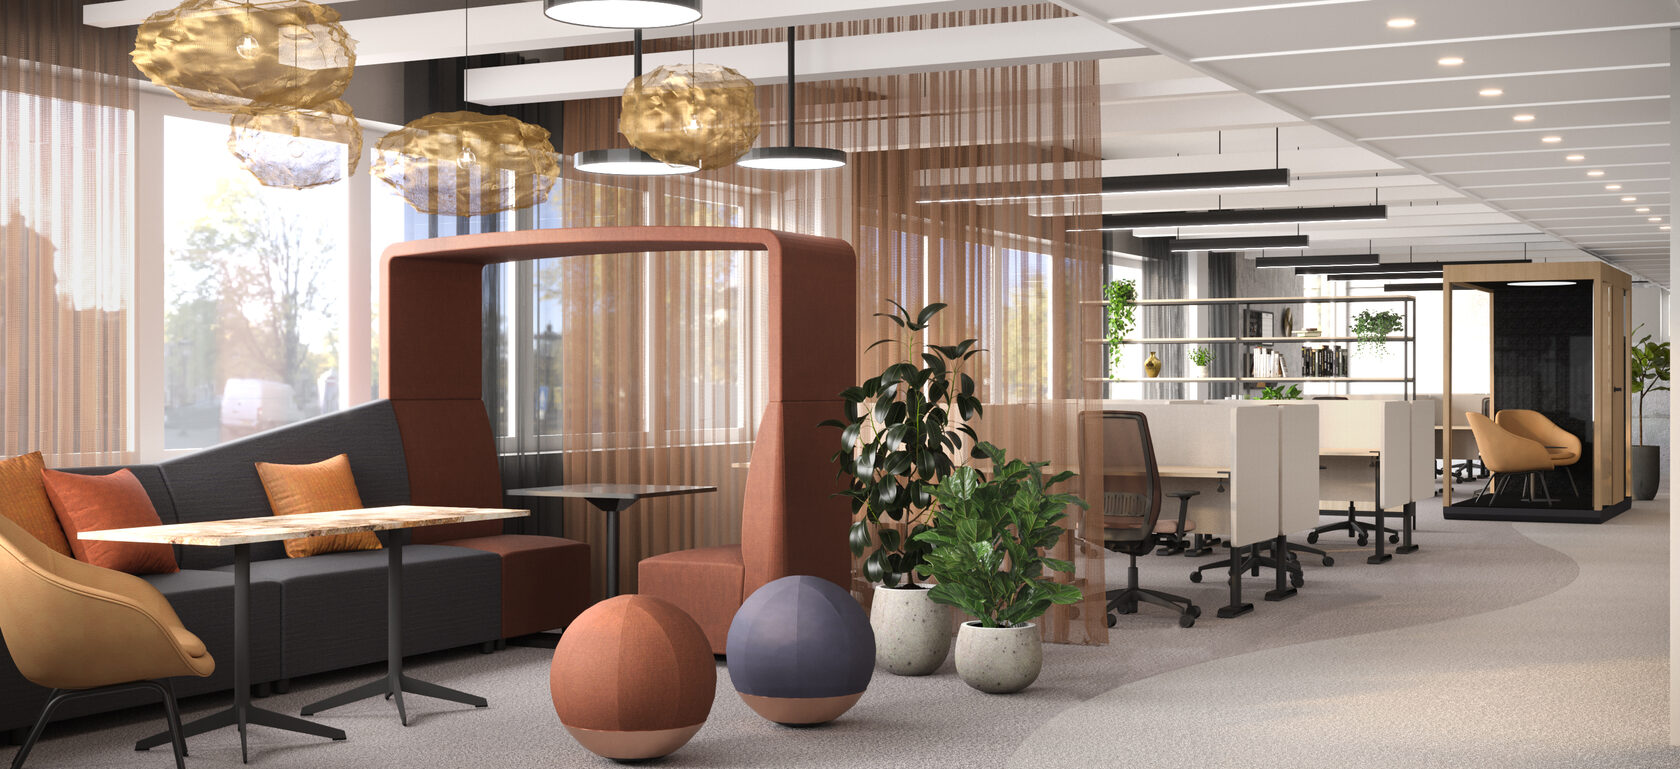 3d visualisation of the office space